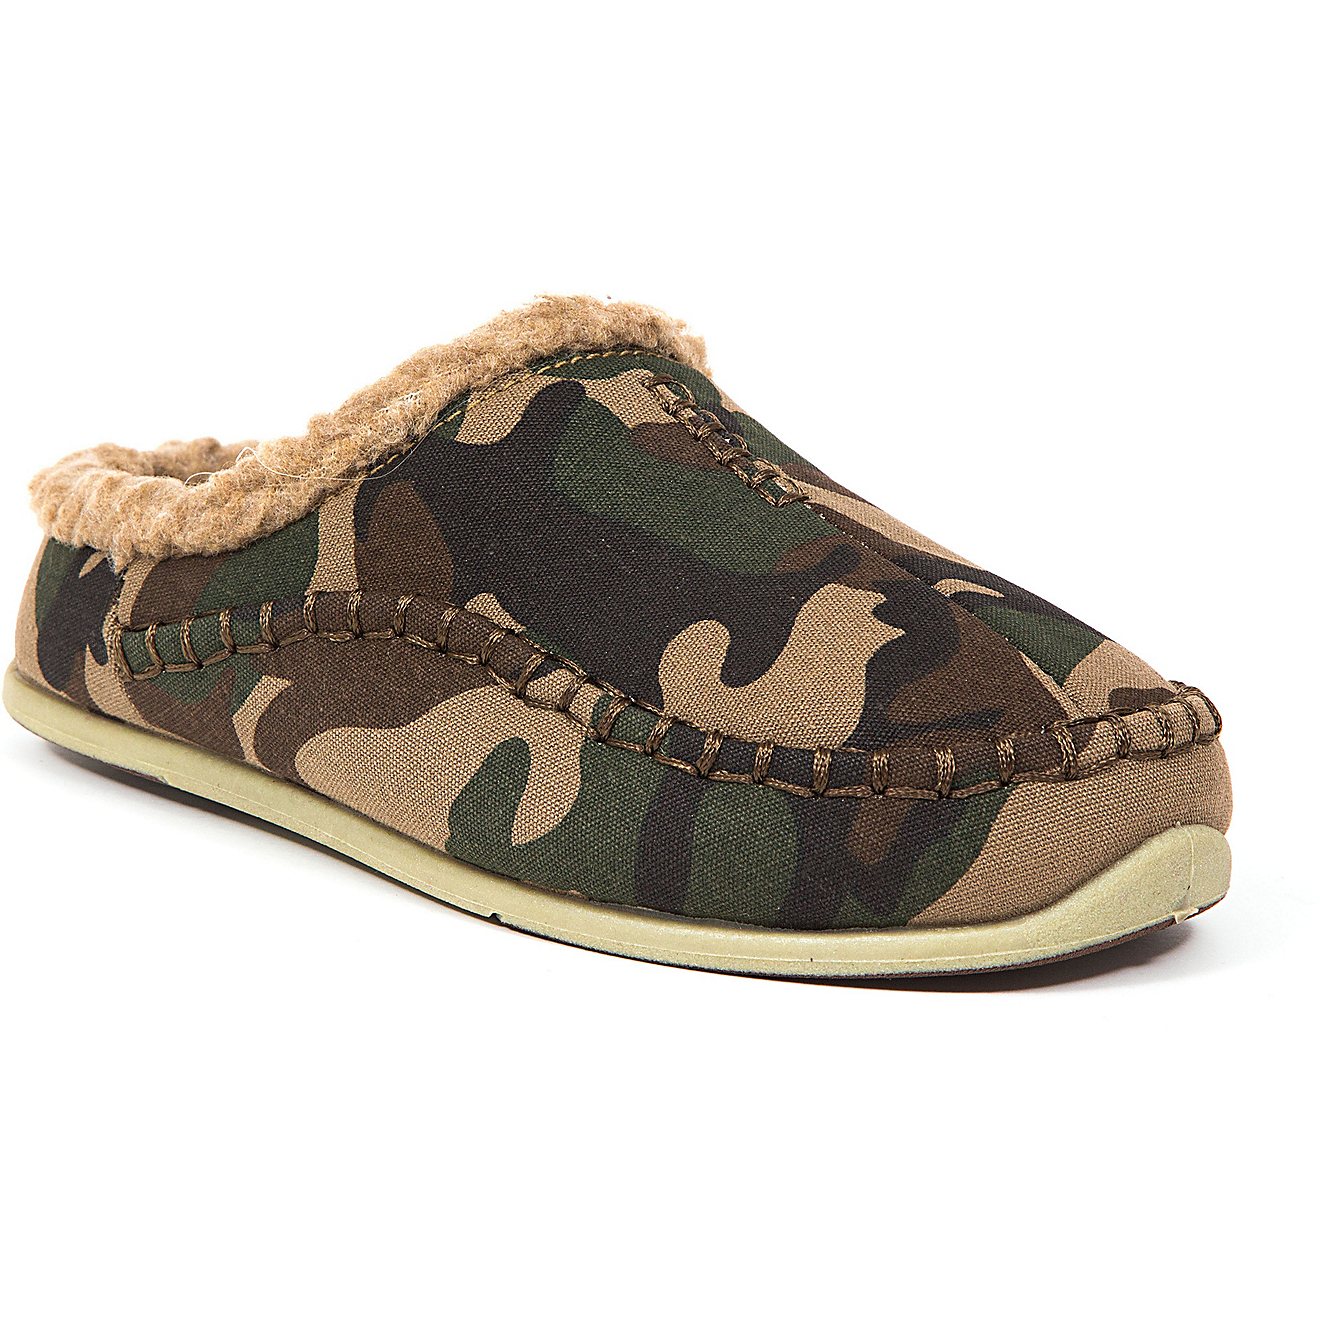 Deer Stags Kids' Slipperooz Lil Nordic Camo Slippers | Academy